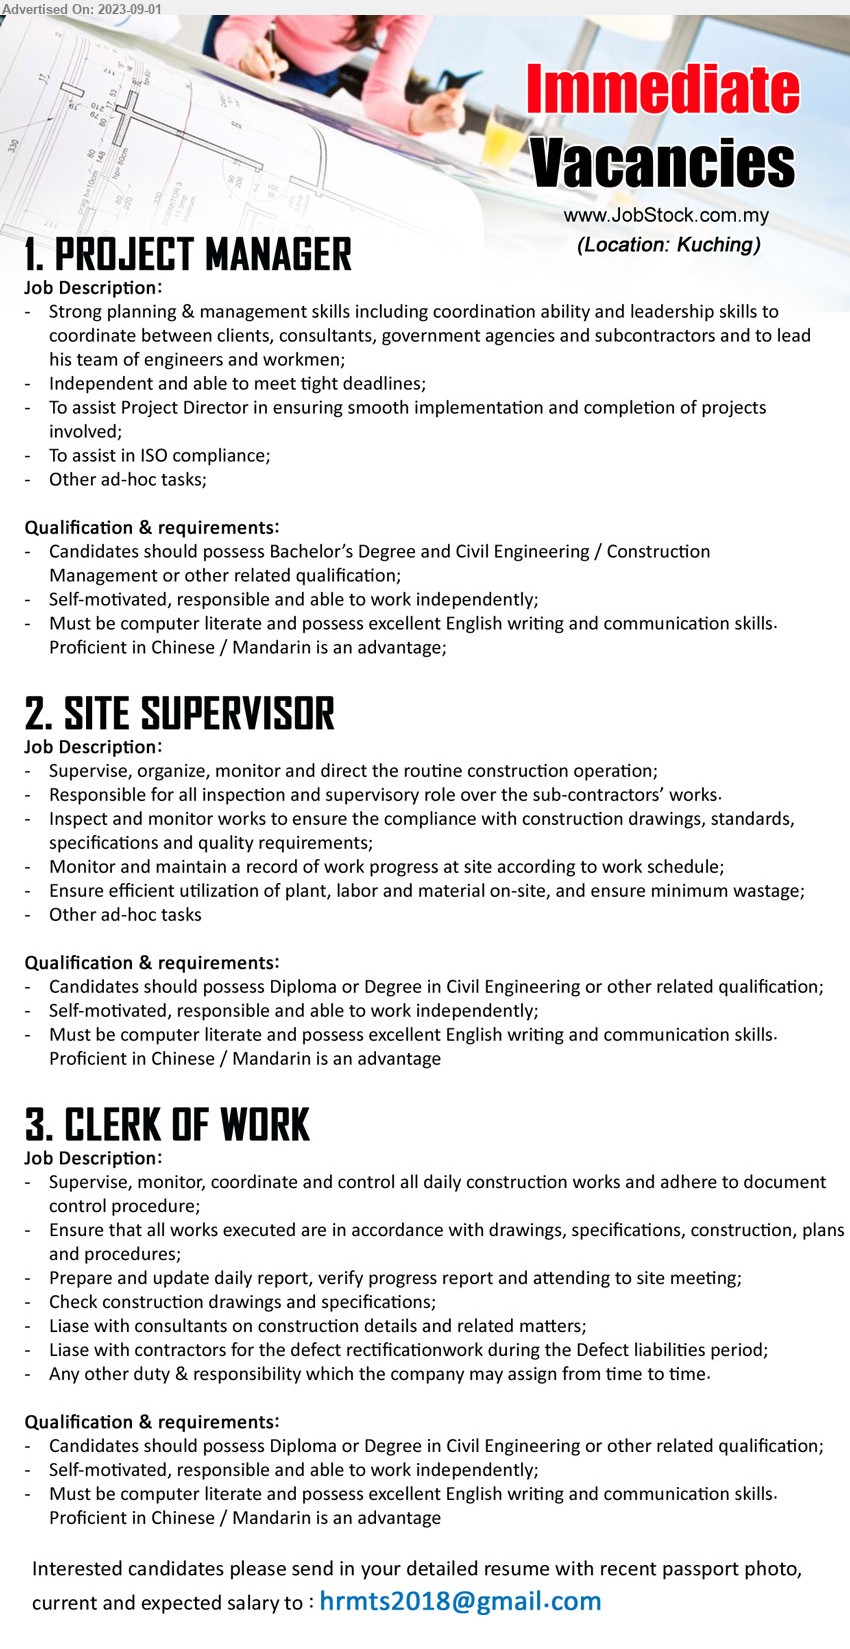 ADVERTISER - 1. PROJECT MANAGER  (Kuching), Bachelor’s Degree and Civil Engineering / Construction ,...
2. SITE SUPERVISOR  (Kuching), Diploma or Degree in Civil Engineering ,...
3. CLERK OF WORK (Kuching),  Diploma or Degree in Civil Engineering,...
Email resume to ...